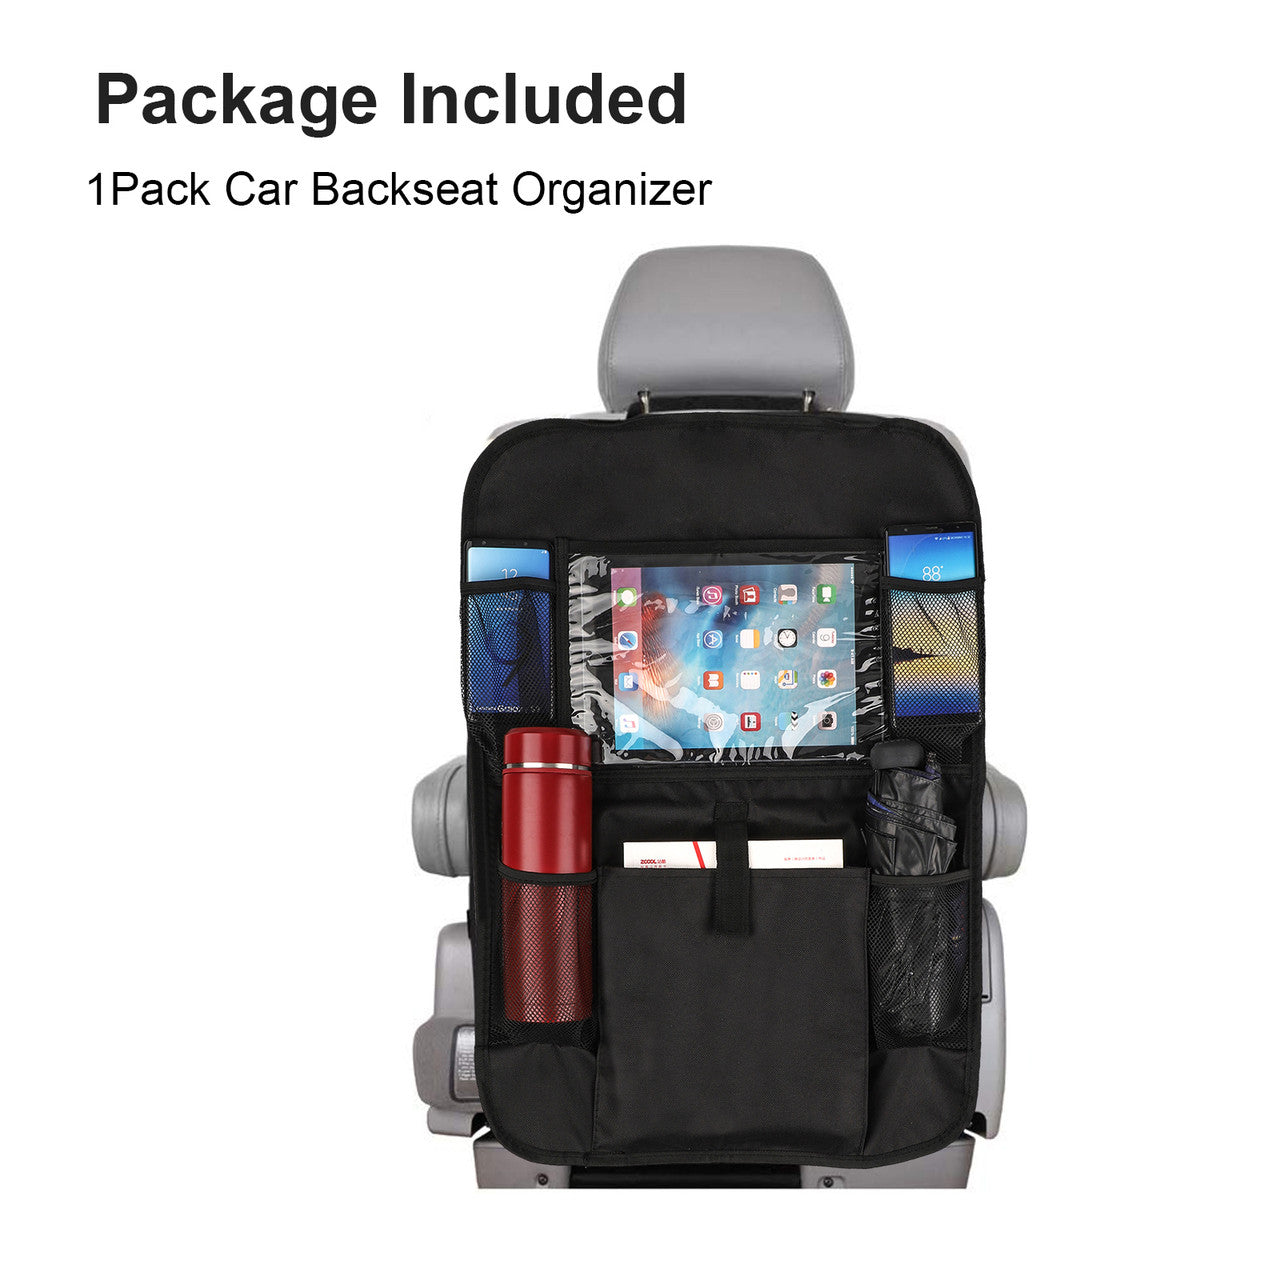 Car Backseat Organizer with Touch Screen Tablet Holder + 6 Storage Pockets